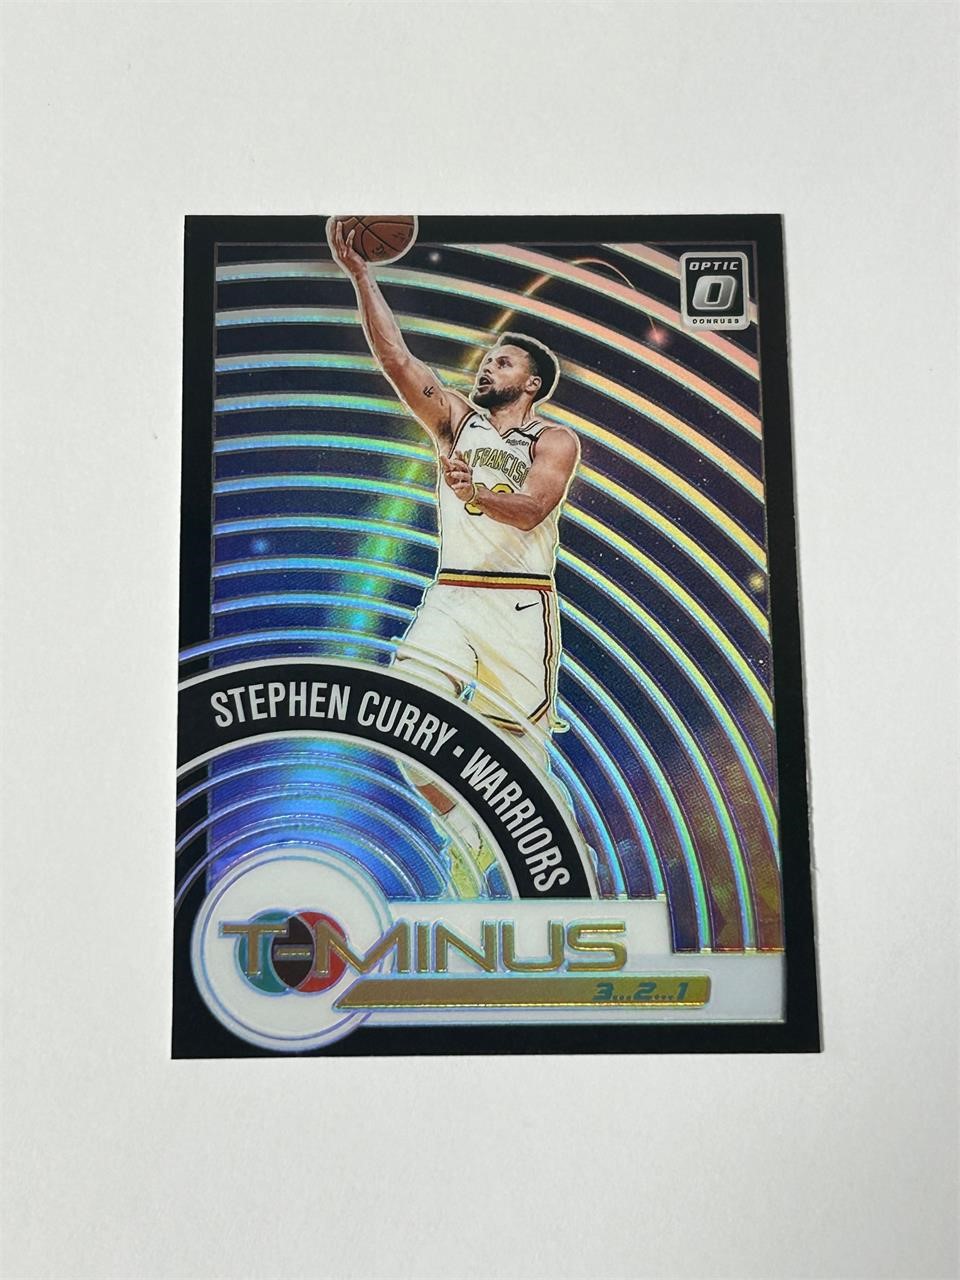 2020 Optic Steph Curry T-Minus 3,2,1 SILVER PRIZM